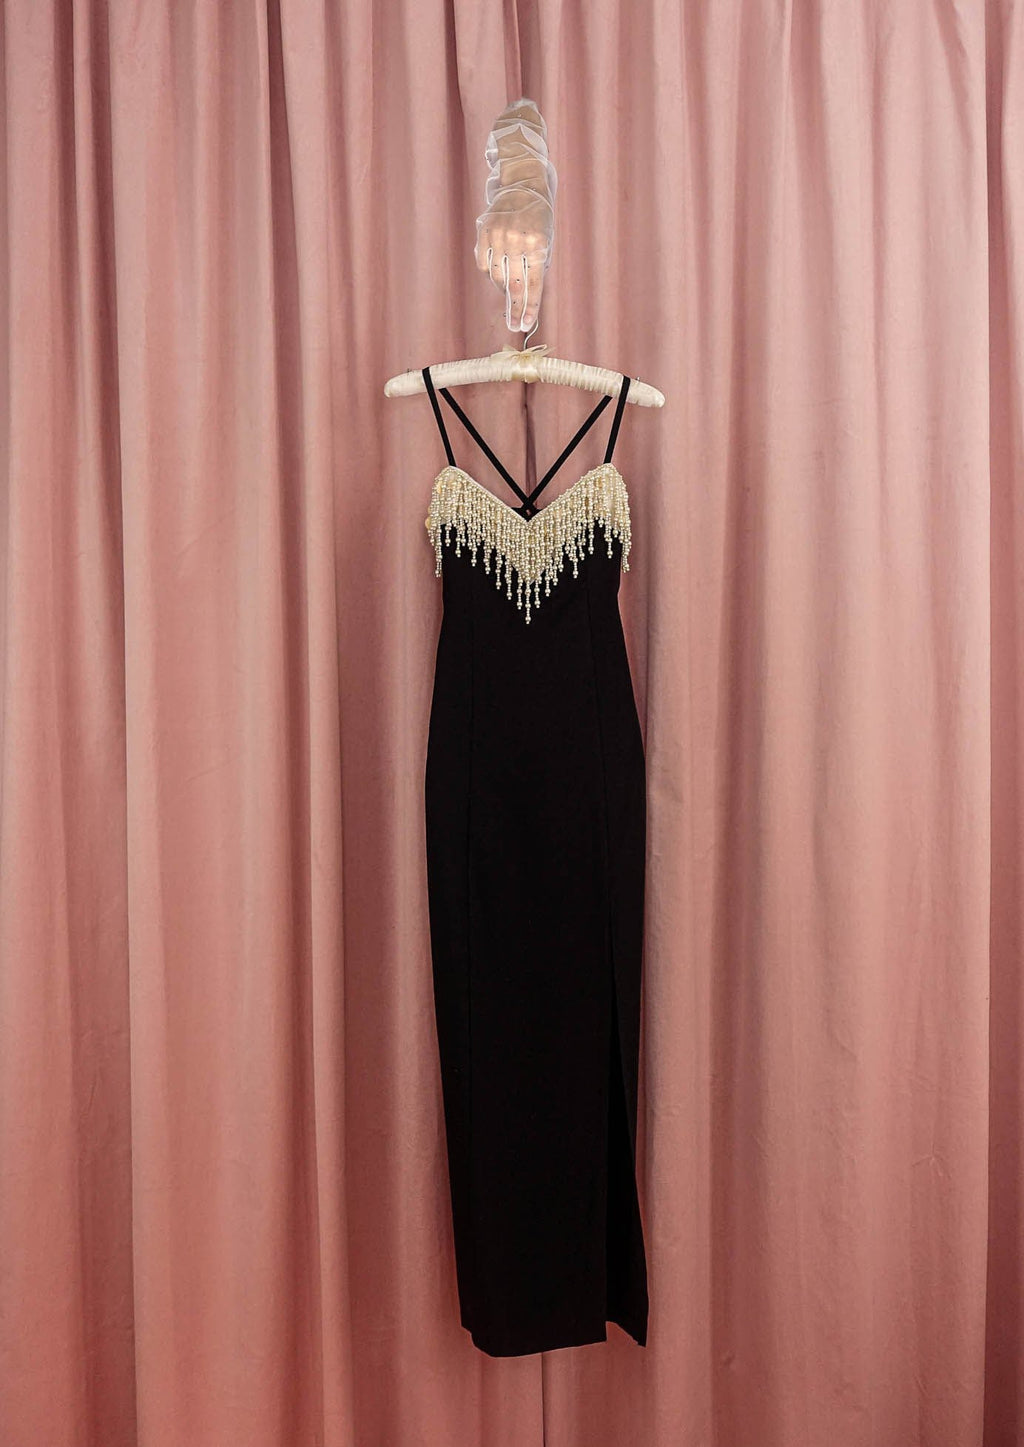 1990s Black Dress With Waterfall Pearl Bust